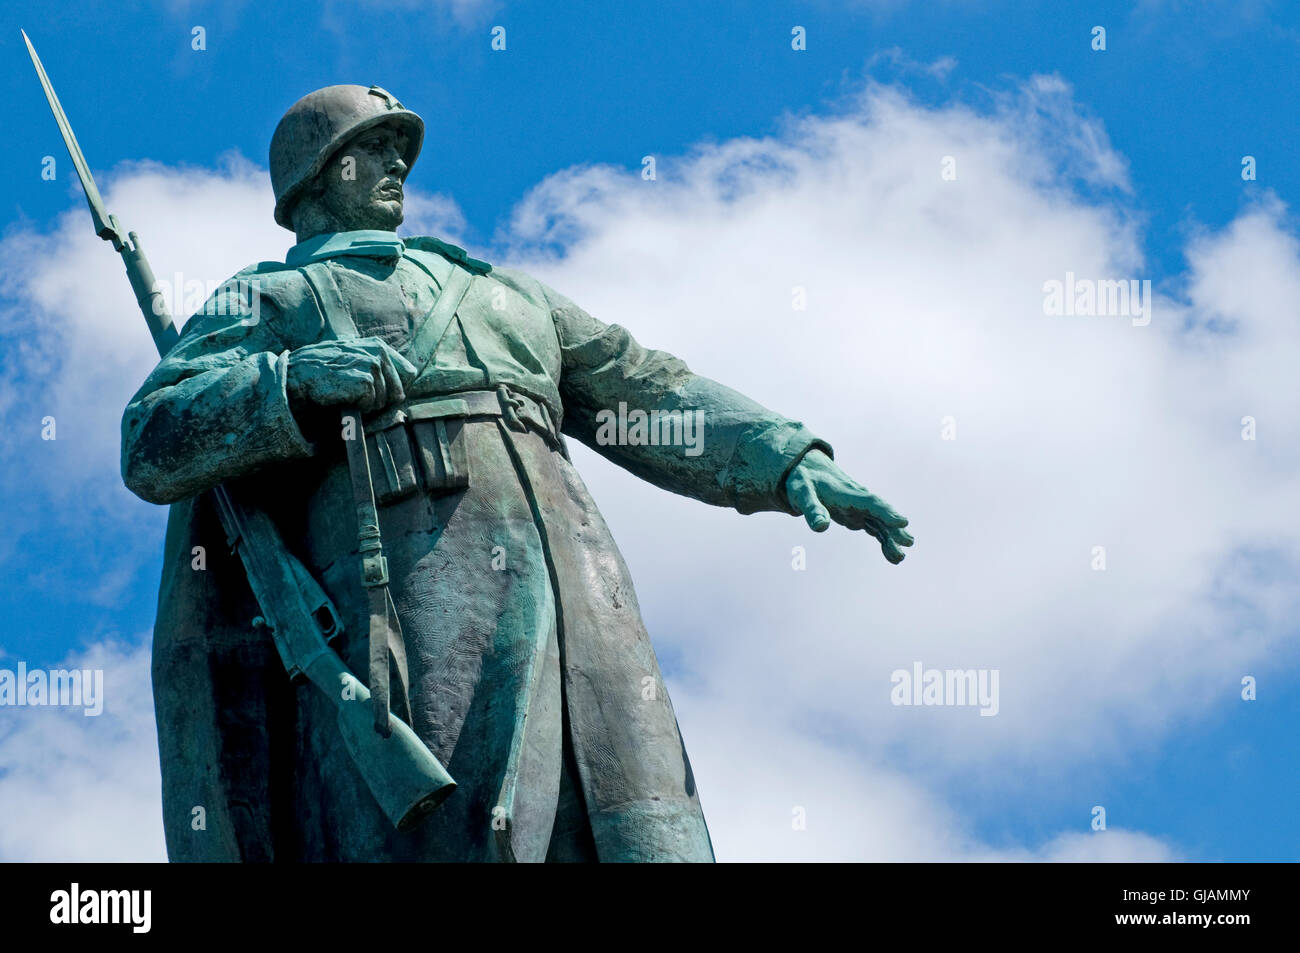 The imposing statue of a soldier atop the Soviet War Memorial in the Tiergarten, Berlin, Germany. Stock Photo